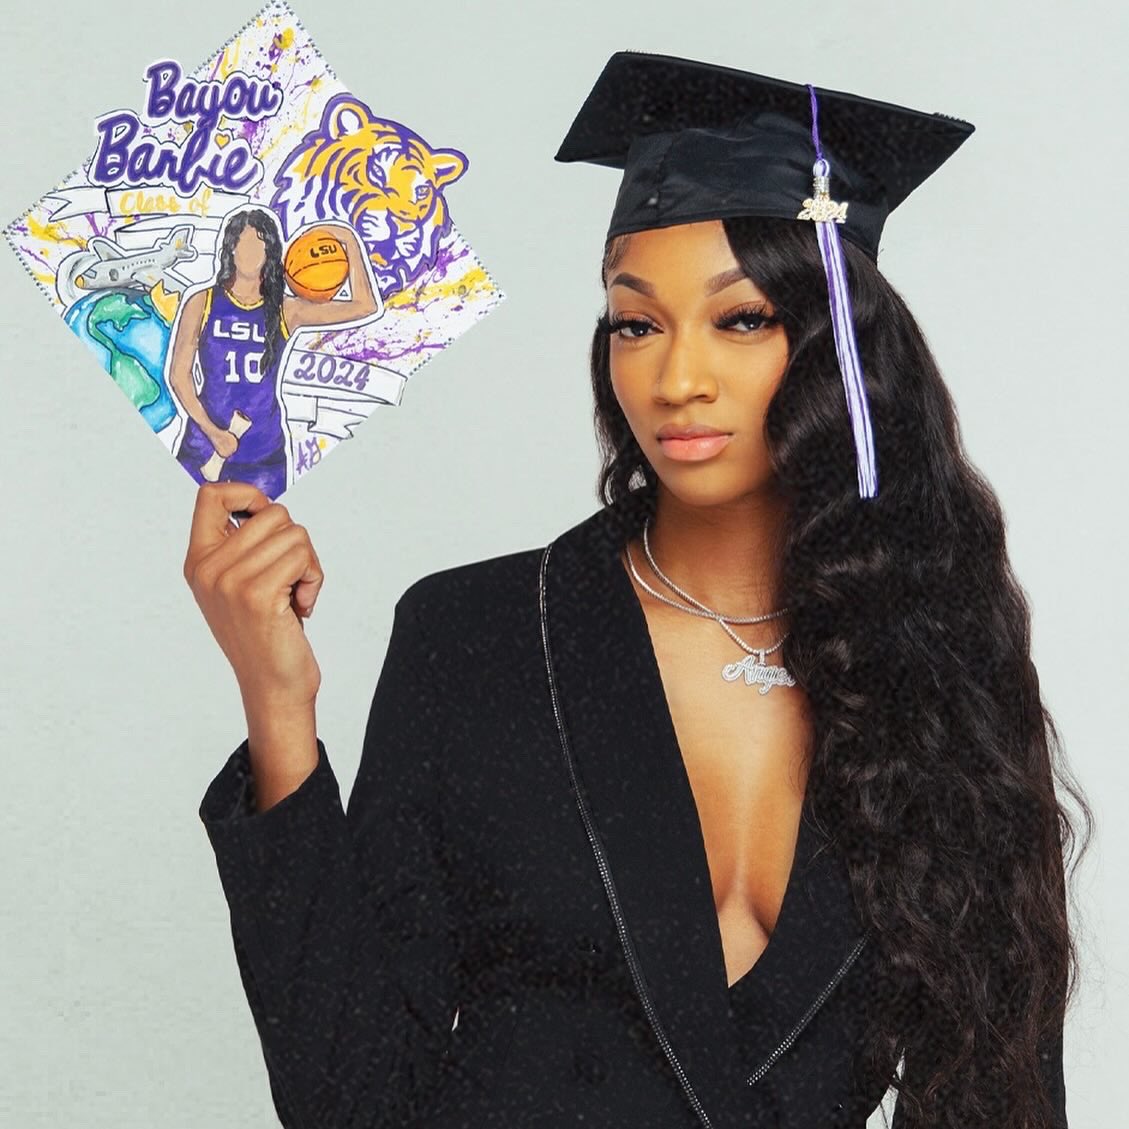 Angel Reese graduated from LSU on Friday. The Chicago Sky rookie earned her degree in Interdisciplinary Studies, with concentrations and minors in Communication Studies, Leadership Development and Psychology. (via @Reese10Angel)